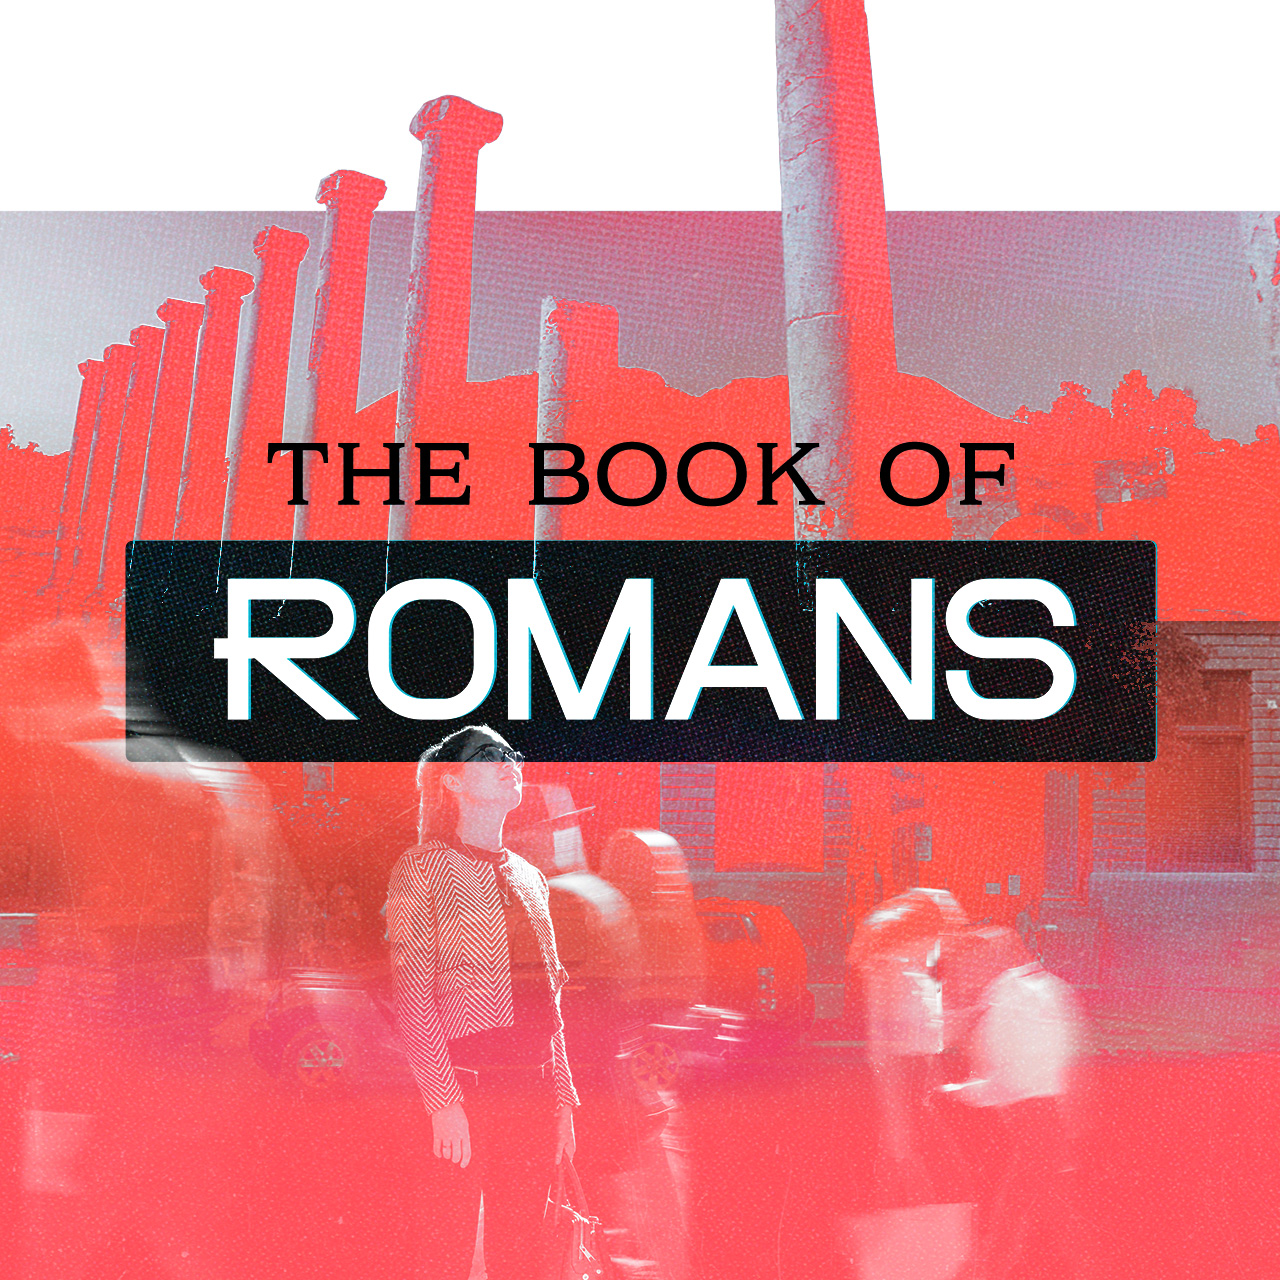 The Book of Romans: Godlessness and Wickedness